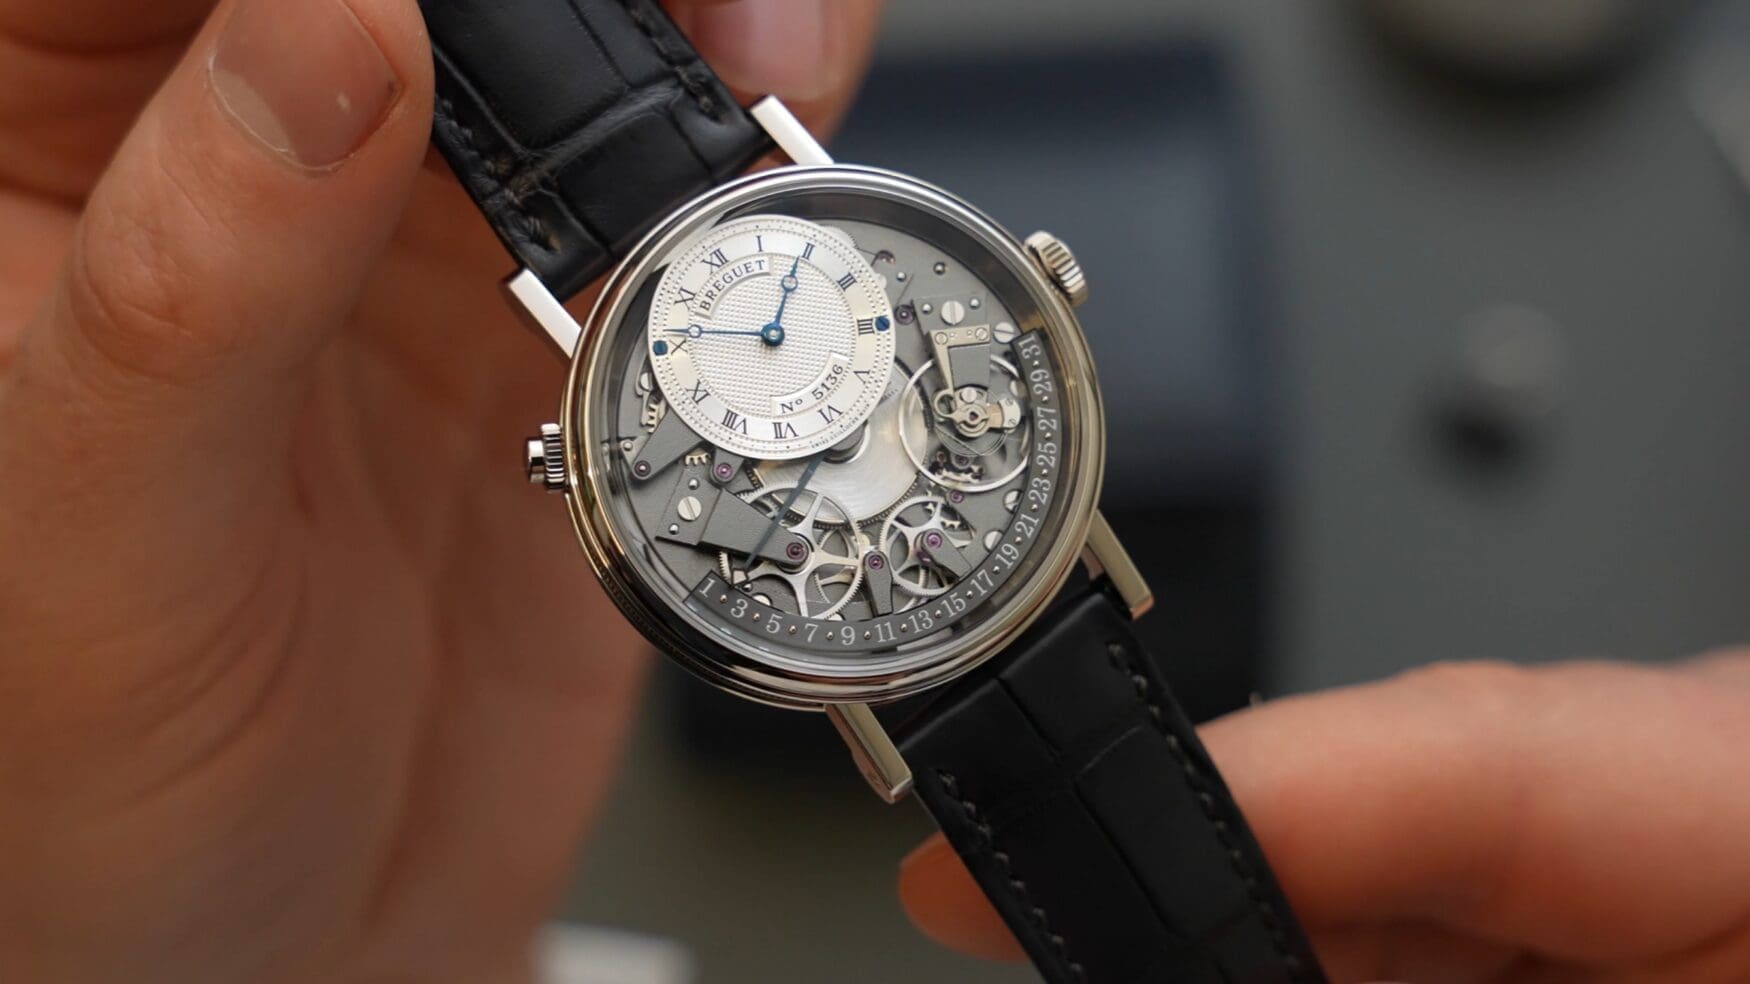 HANDS-ON: The Breguet Tradition Quantième Rétrograde 7597 is horology over hype